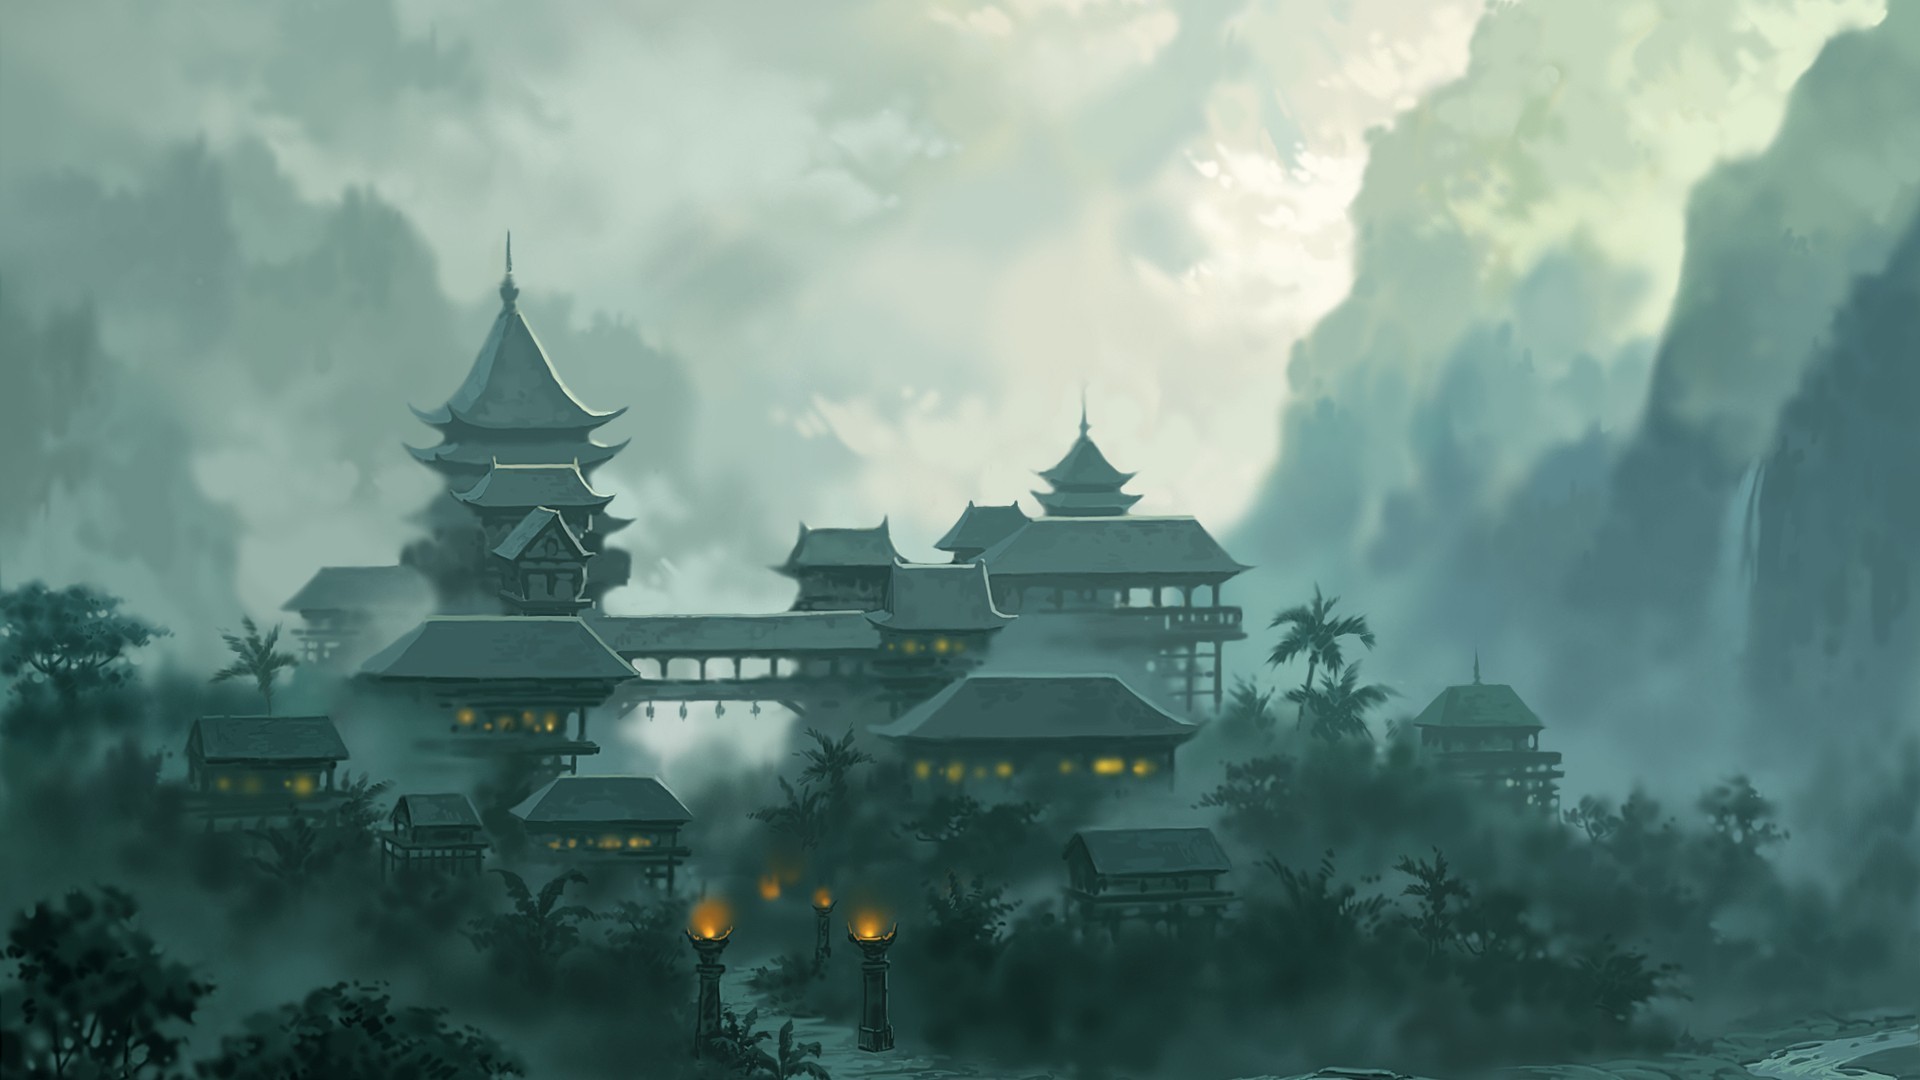 asian, Oriental, Fantasy, Art, Temple, Church, Cathedral, Architecture, Buildings, Landscapes, Mountains, Jungle, Clouds, Fog Wallpaper